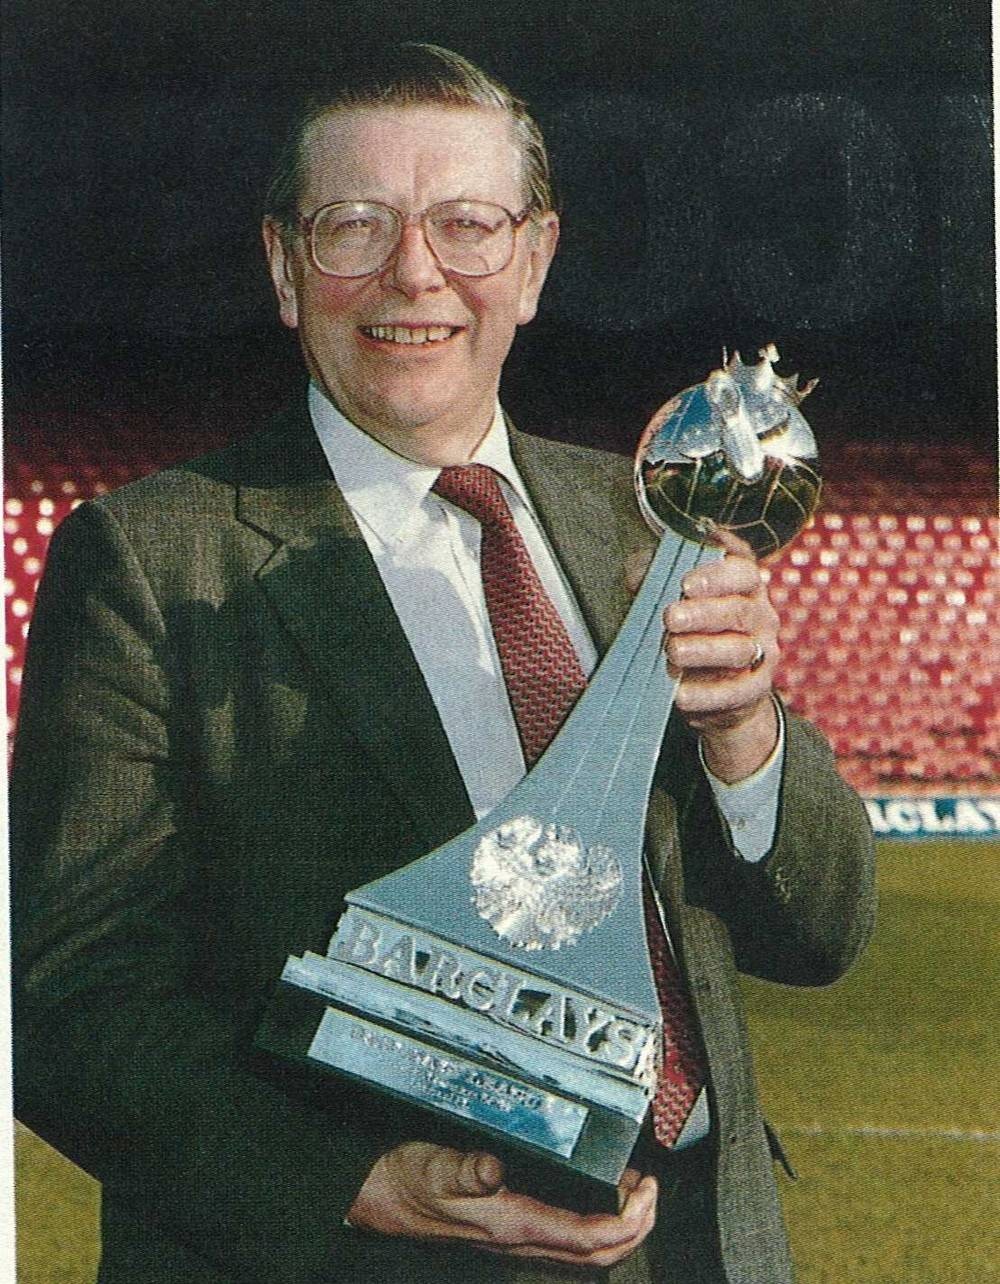 Former Barclays Group chairman John Quinton with the Football League trophy